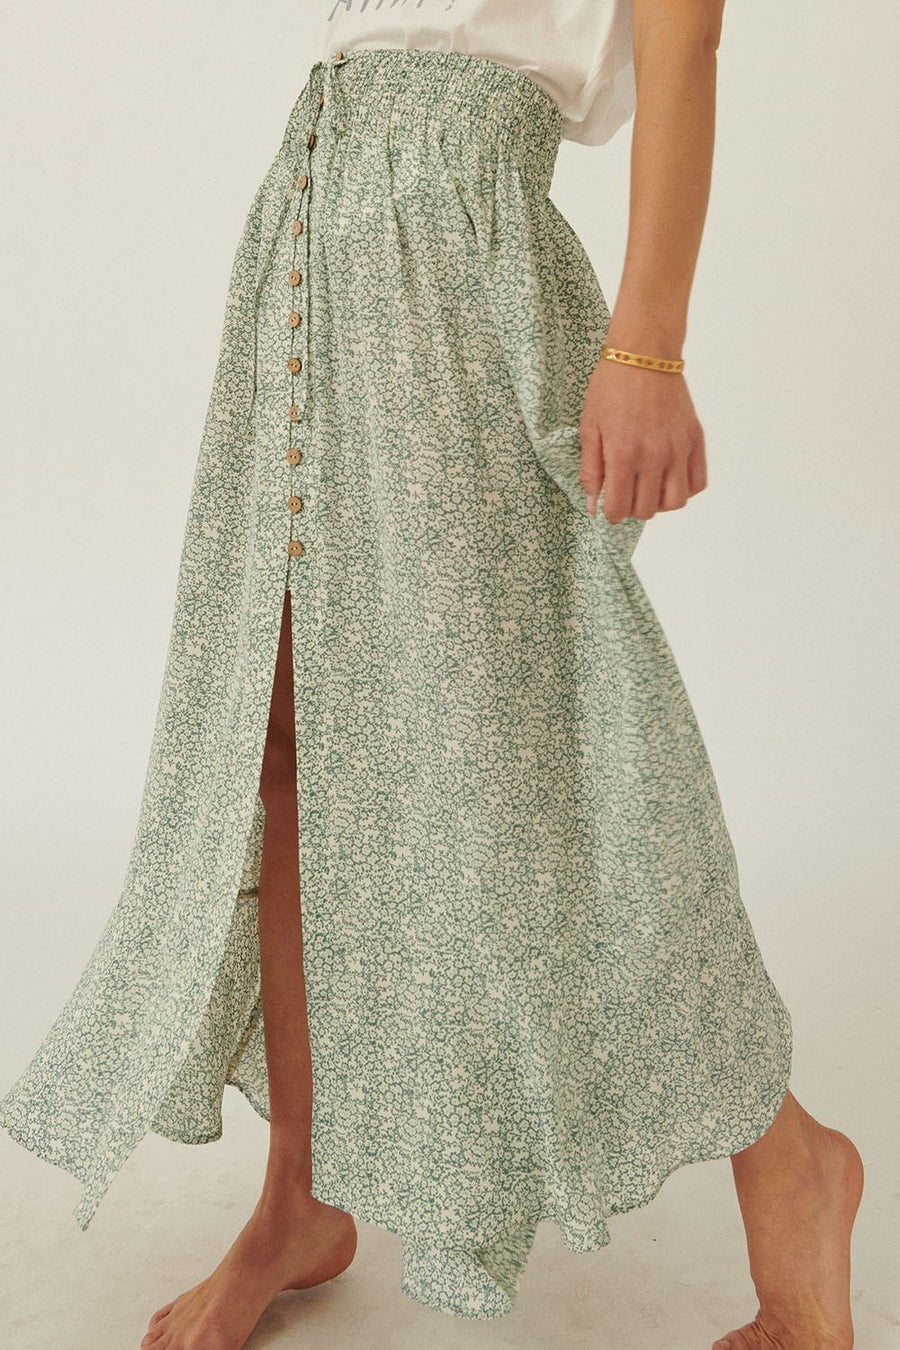 The Lily Floral Skirt